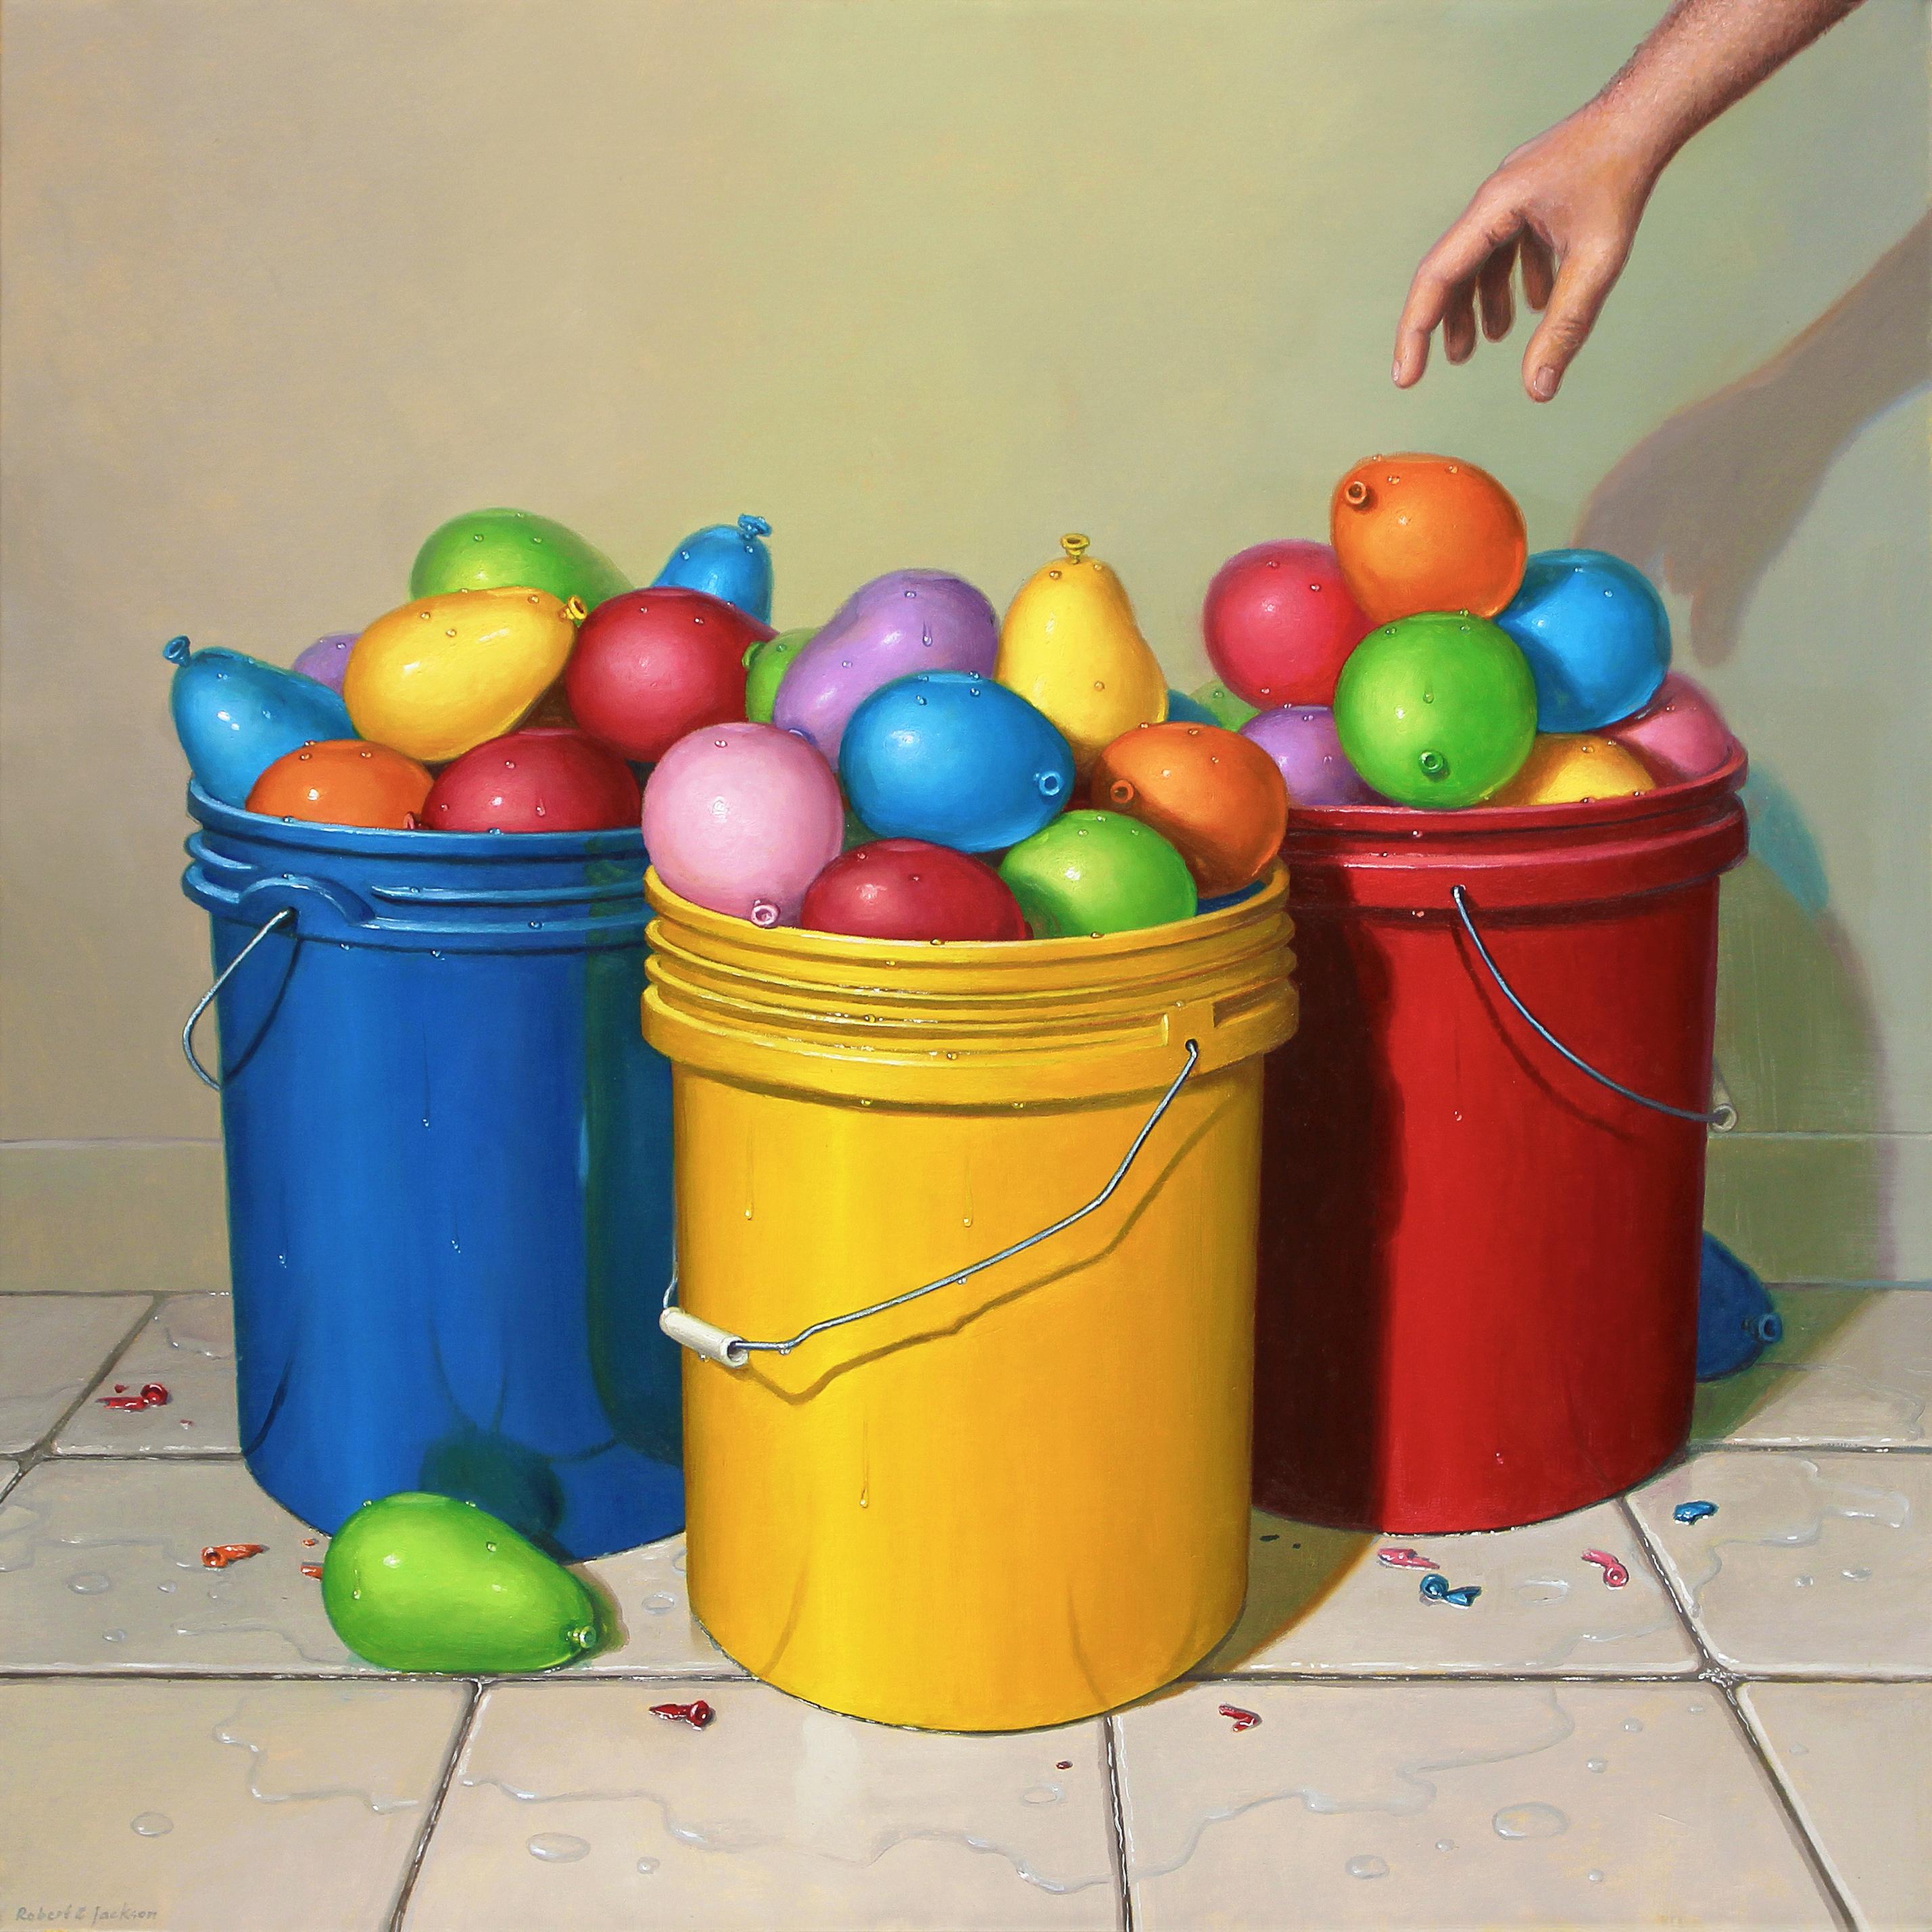 Robert Jackson Still-Life Painting - READY - Realism / Oil Painting / Contemporary / Humor / Balloons